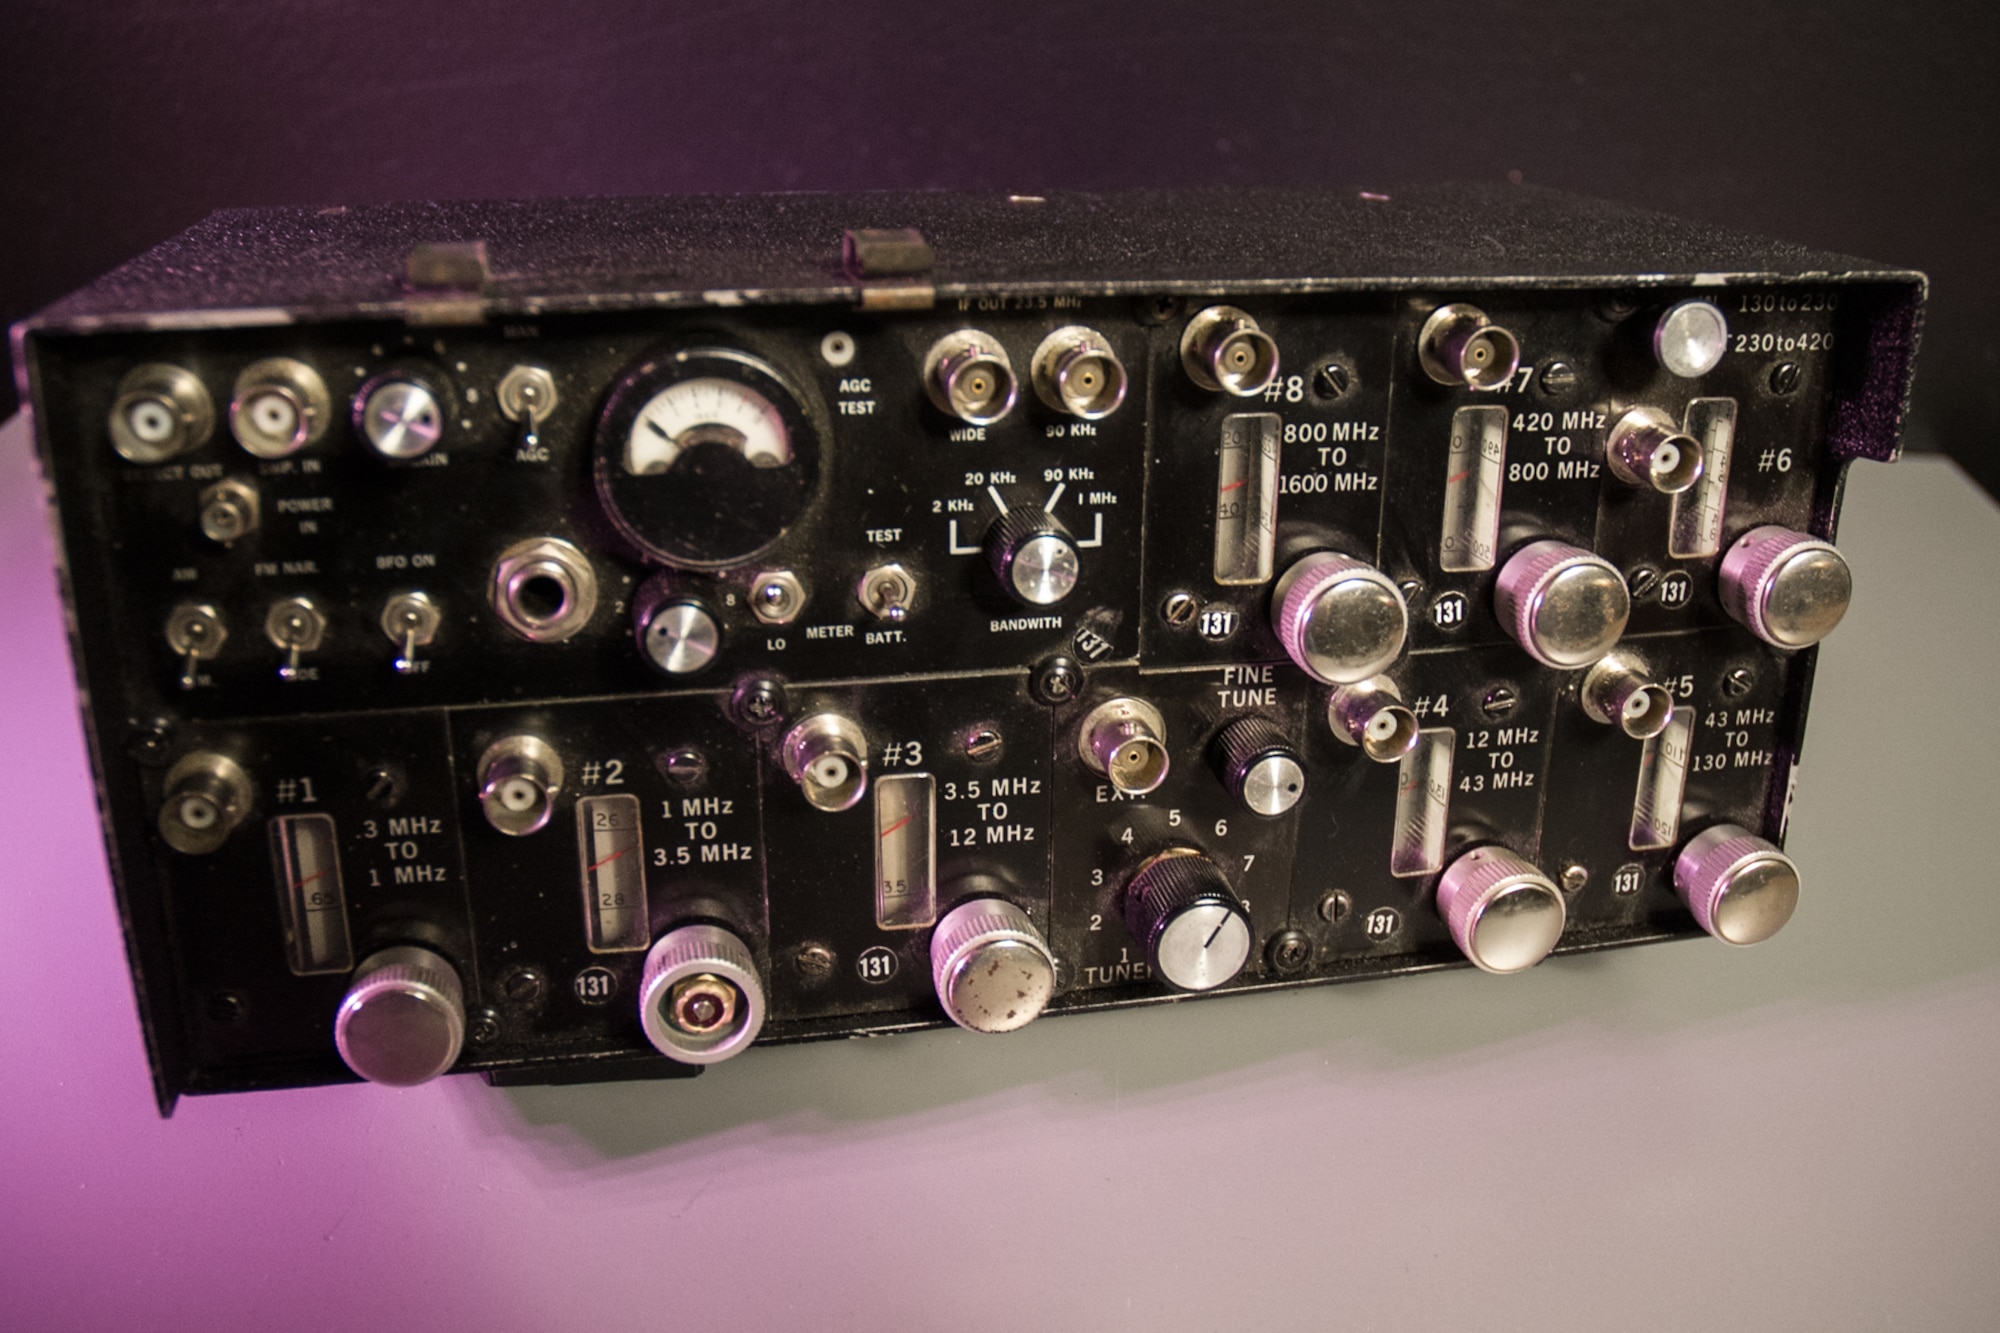 DAYTON, Ohio - An electronic listening device receiver on display in the Office of Special Investigations exhibit in the Cold War Gallery at the National Museum of the U.S. Air Force. (U.S. Air Force photo)